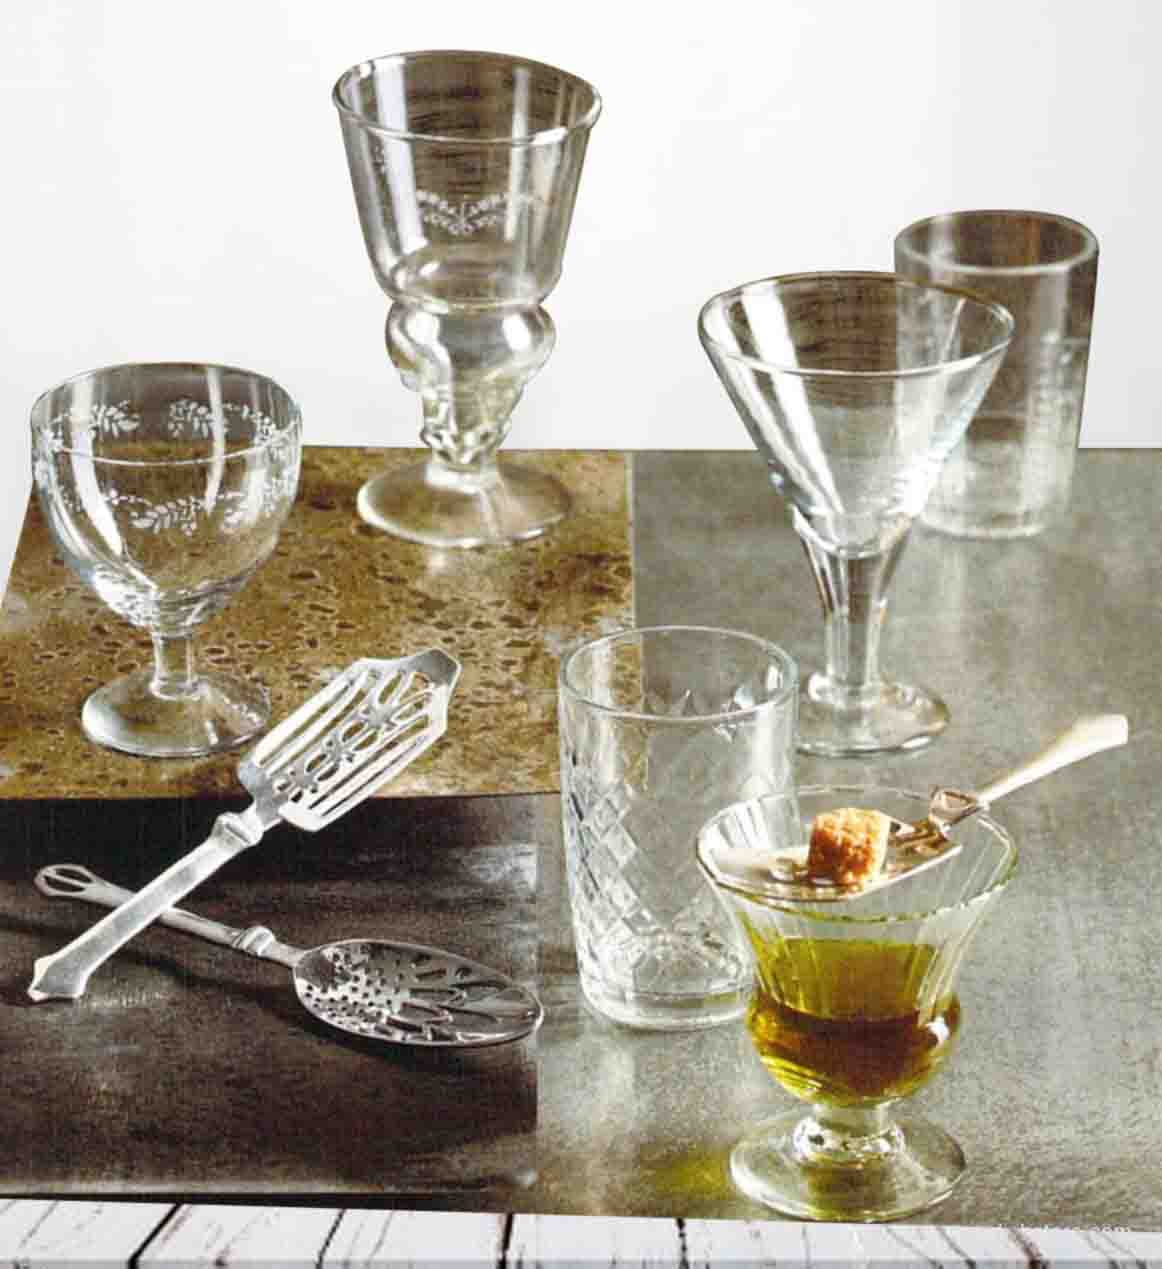 Roost St. Remy Aperitif Glasses & Absinthe Spoons-9